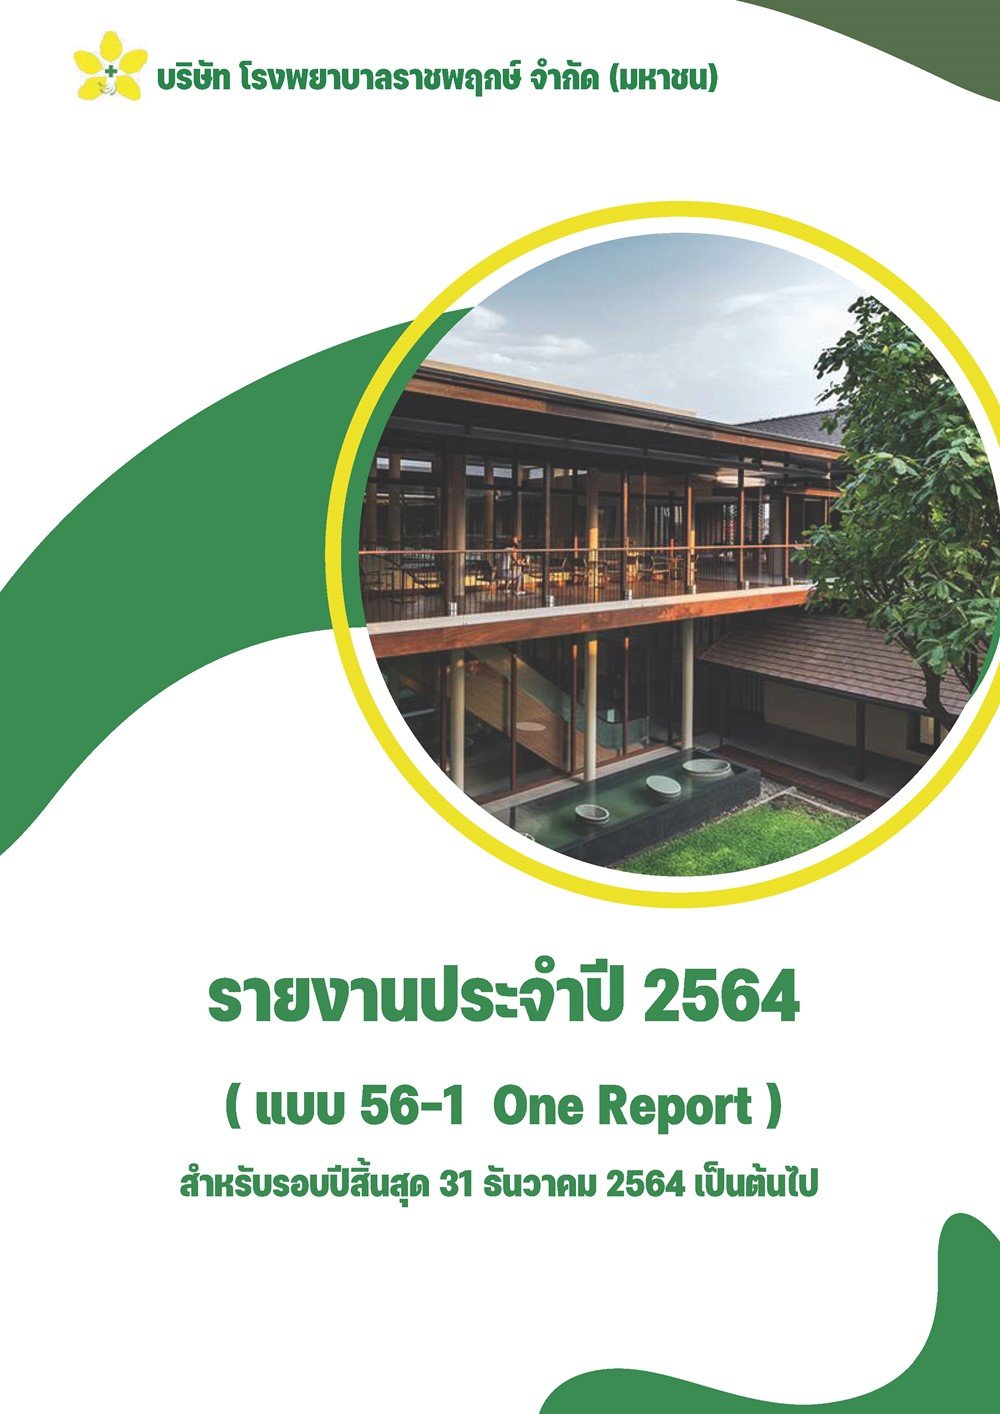 Annual Report 2021 (Form 56-1 One Report)